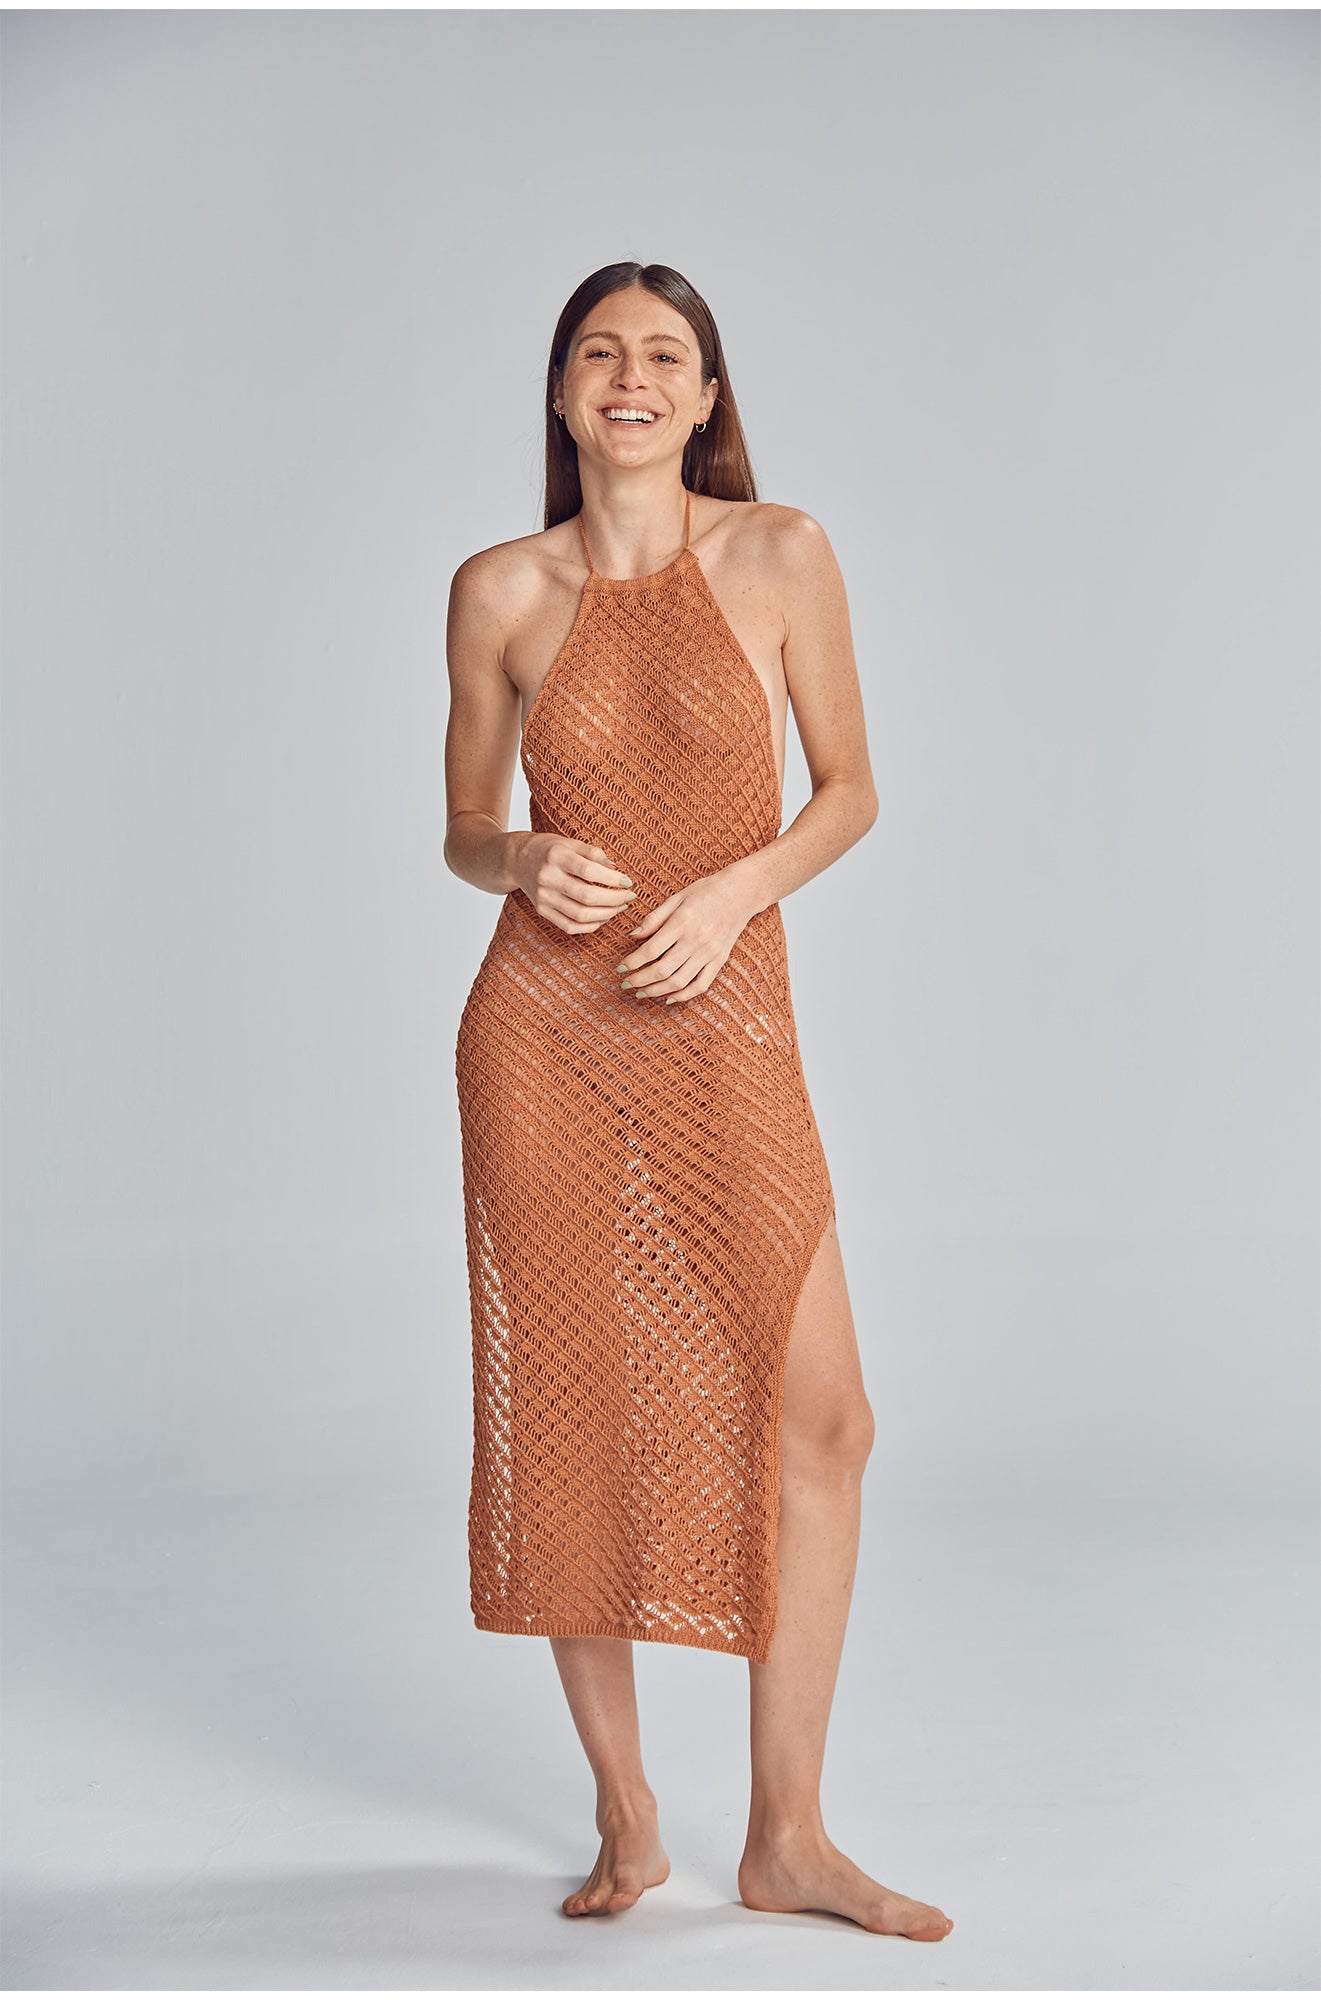 Halter midi dress featuring a side slit, and fully exposed back. Handmade crochet by Peruvian artisans.  50% Cotton 50% Polyester. Made in Peru.